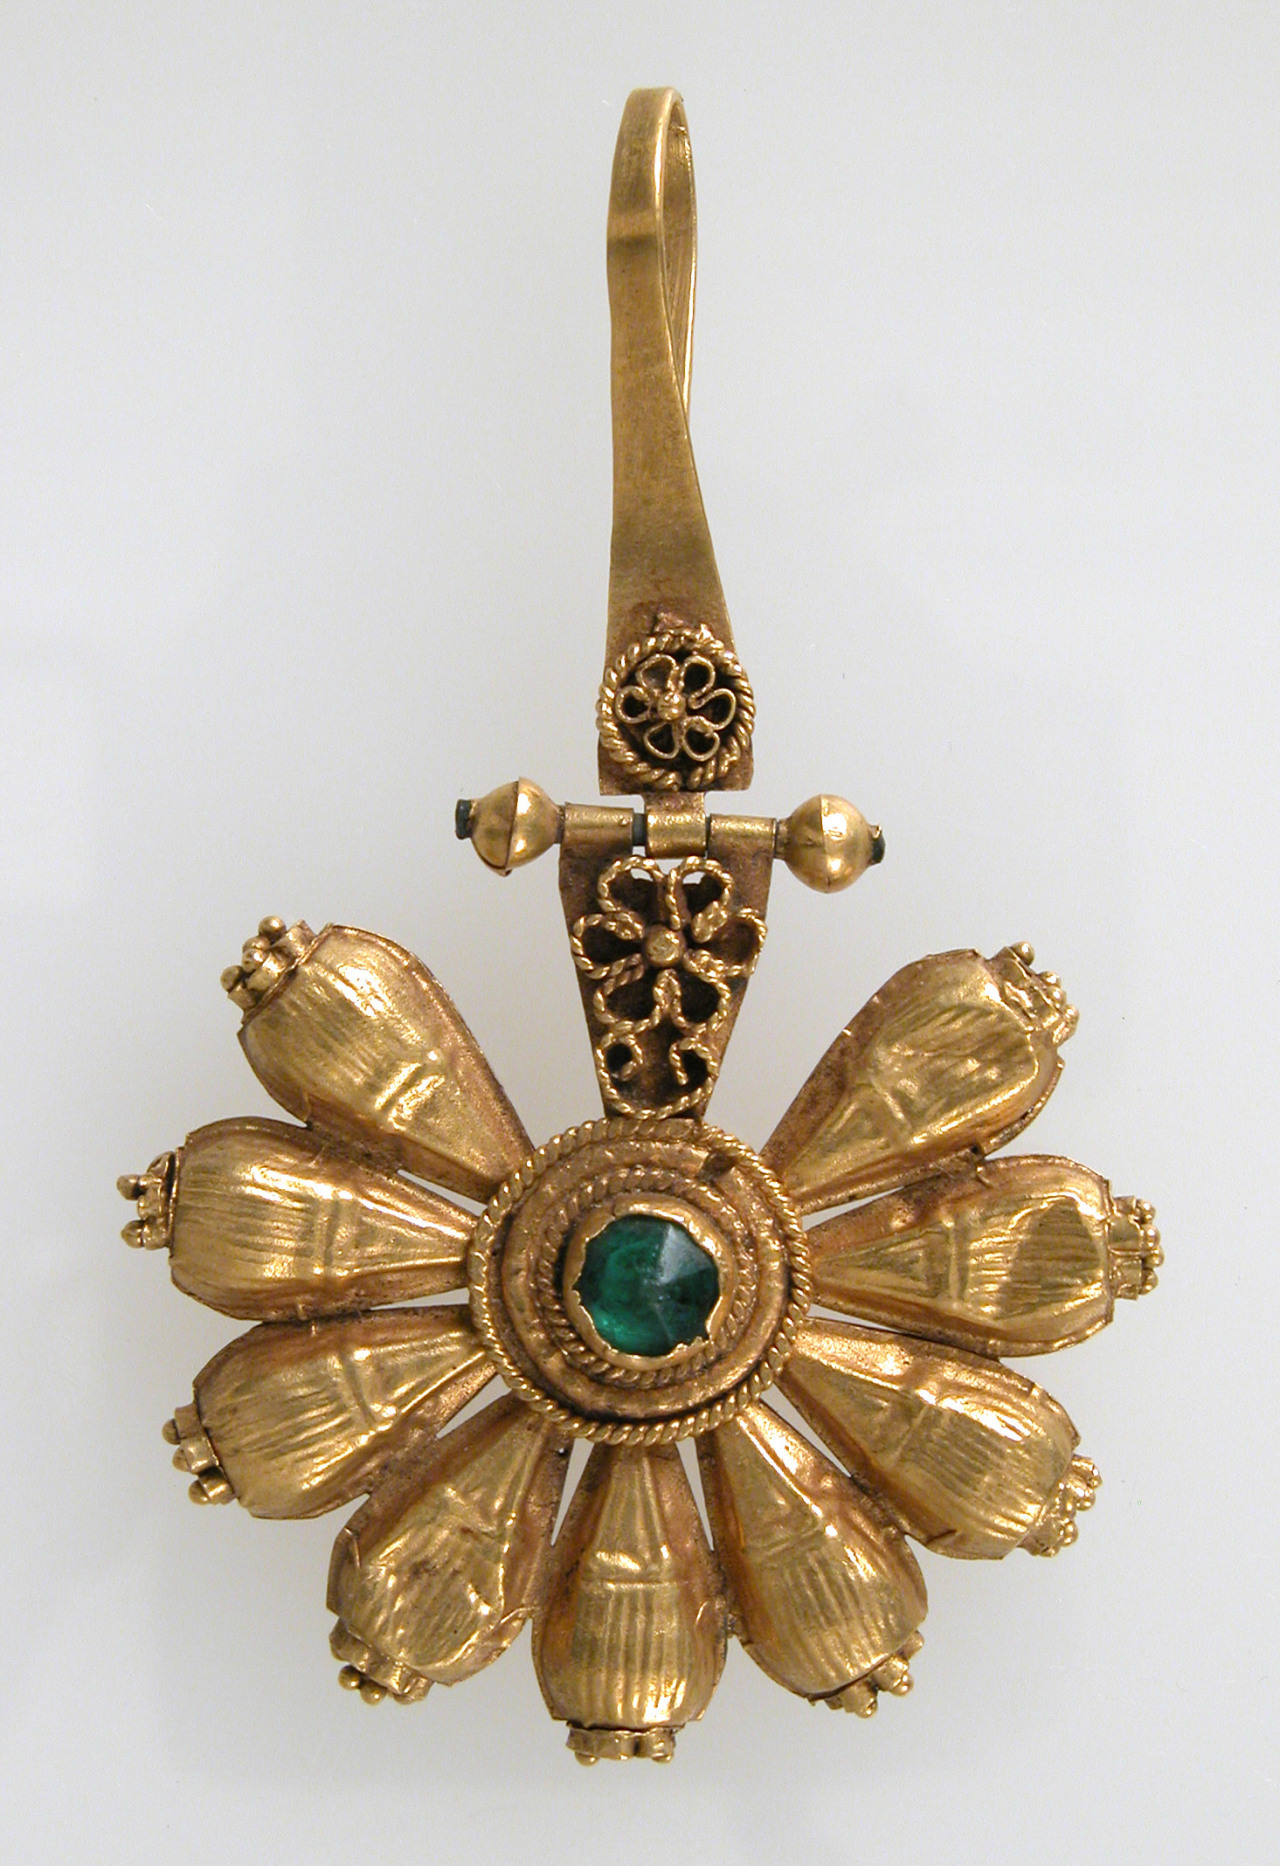 Ostrogothic gold and emerald earring, 3rd century, from The Metropolitan Museum of Art.jpg